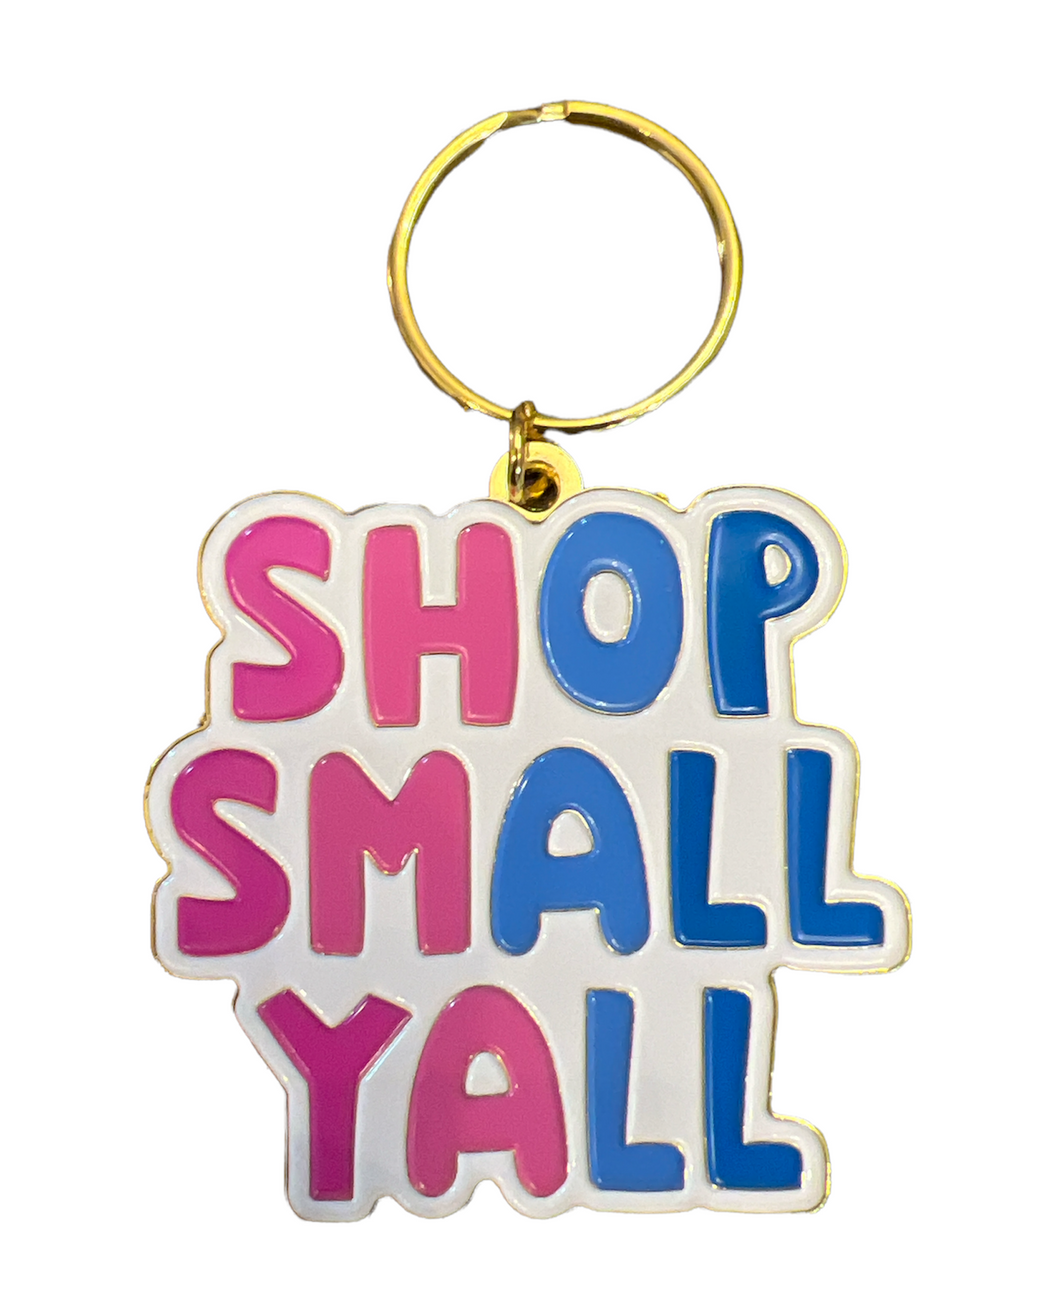 Shop Small Ya'll Gold Enamel Keychain Small Business Owner Gifts for Women